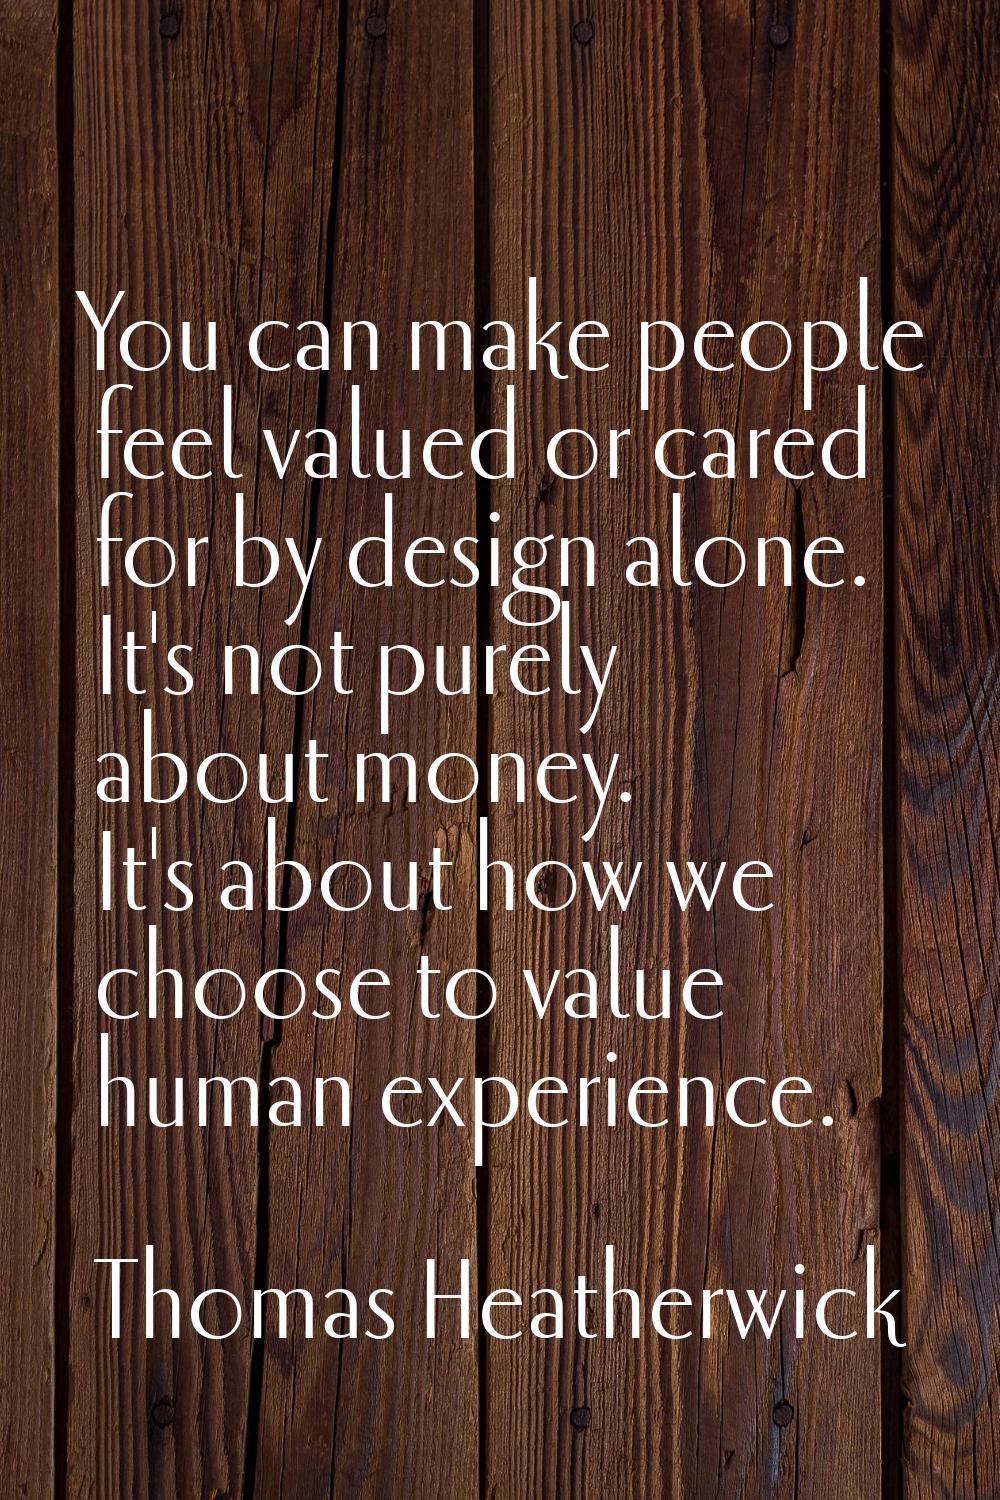 You can make people feel valued or cared for by design alone. It's not purely about money. It's abo